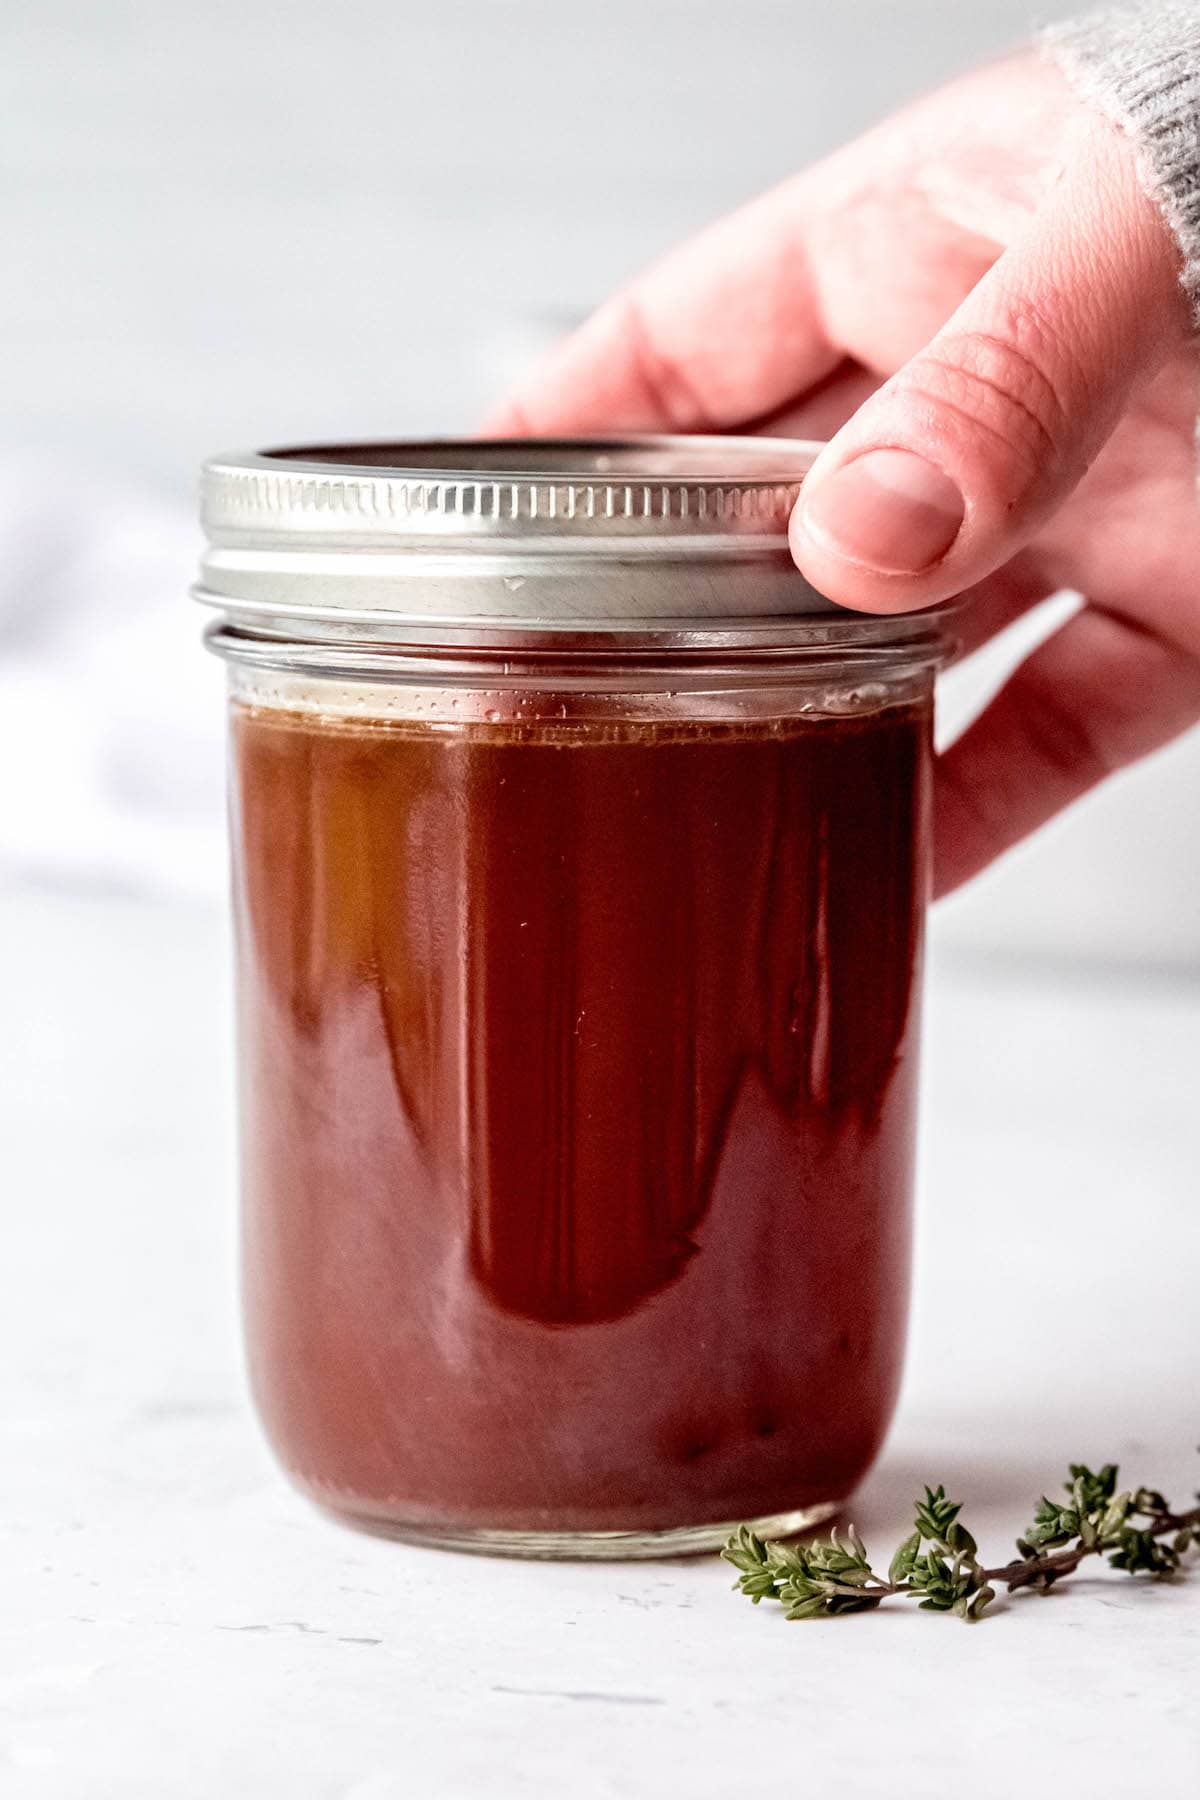 hand screwing a lid on a mason jar filled with homemade sipping broth made from scraps.